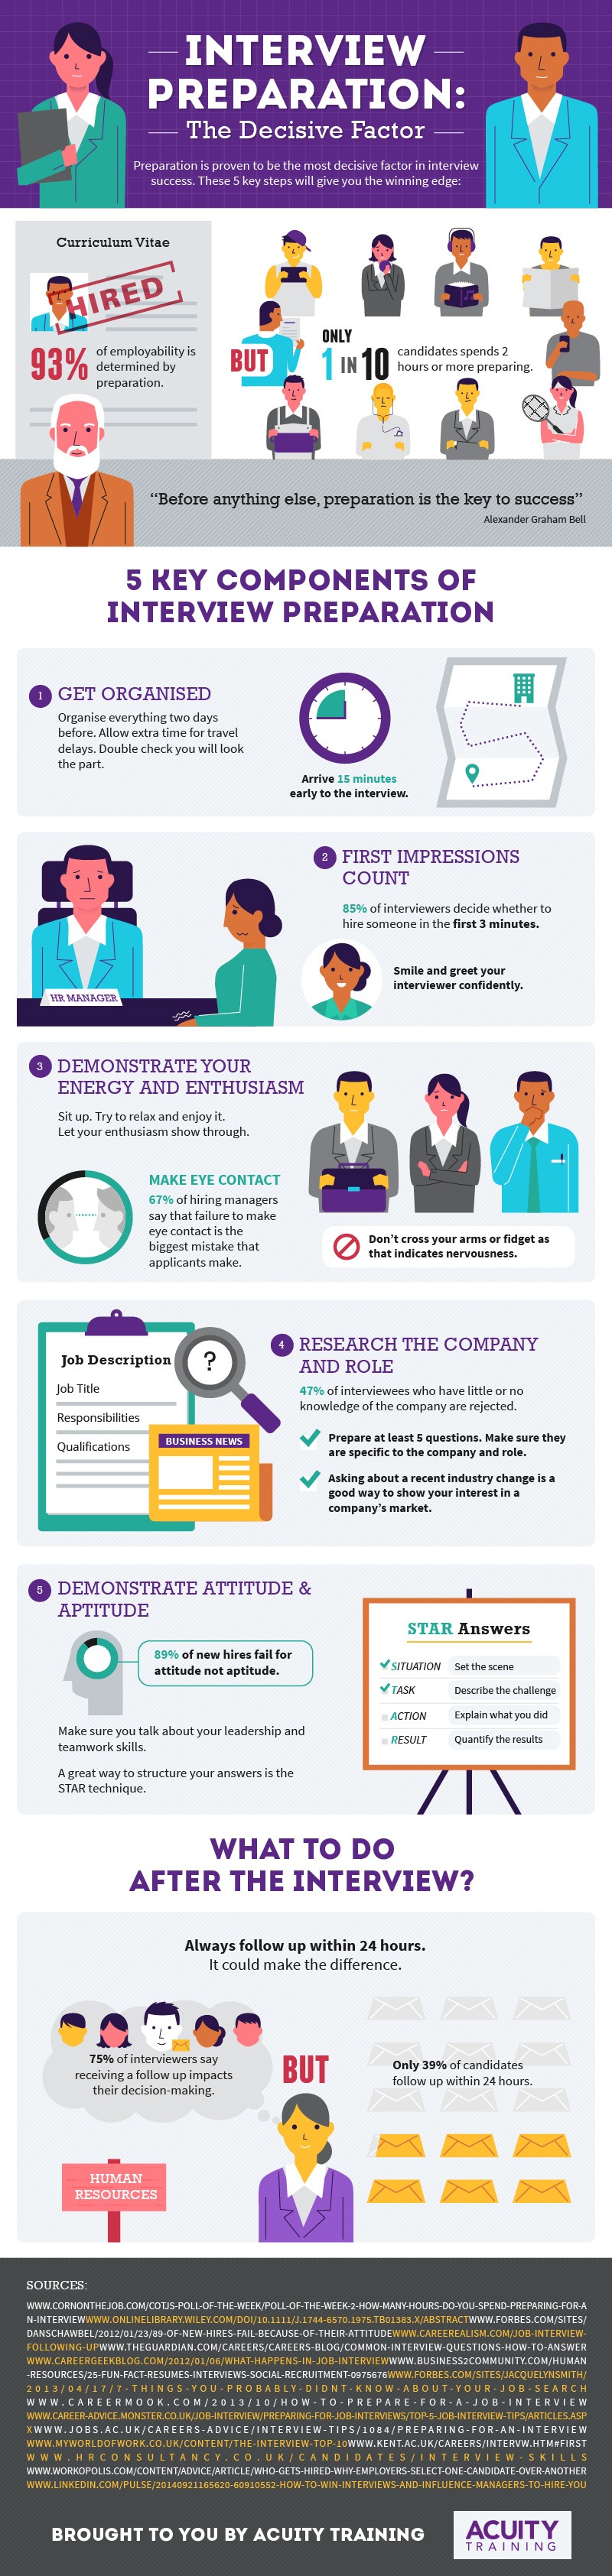 How to prepare for successful job interview